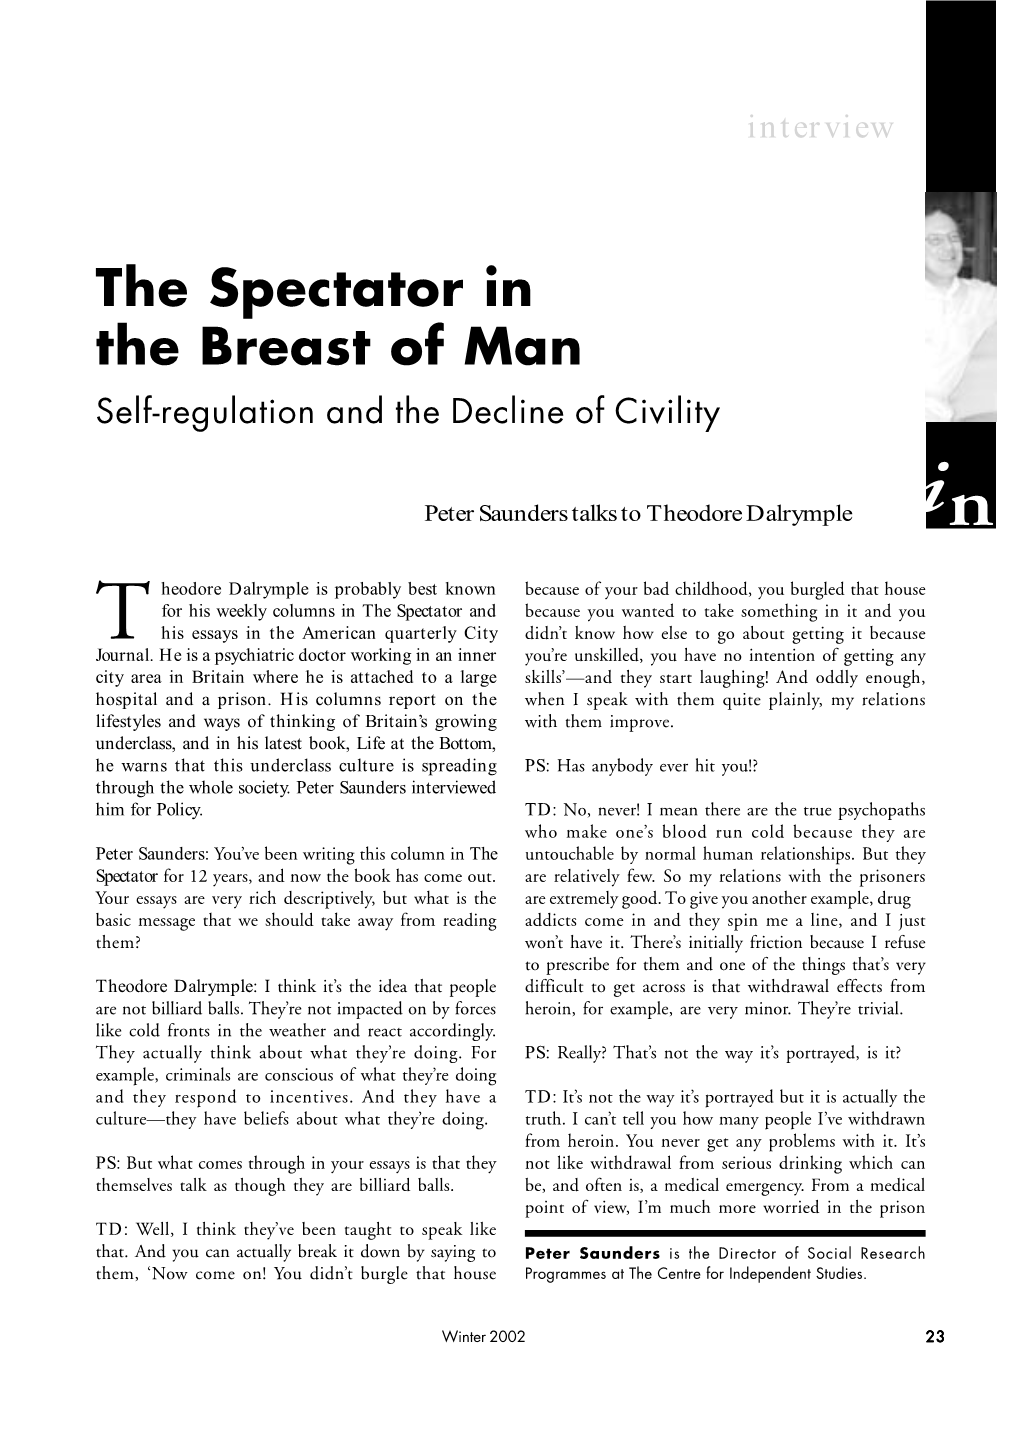 The Spectator in the Breast of Man Self-Regulation and the Decline of Civility